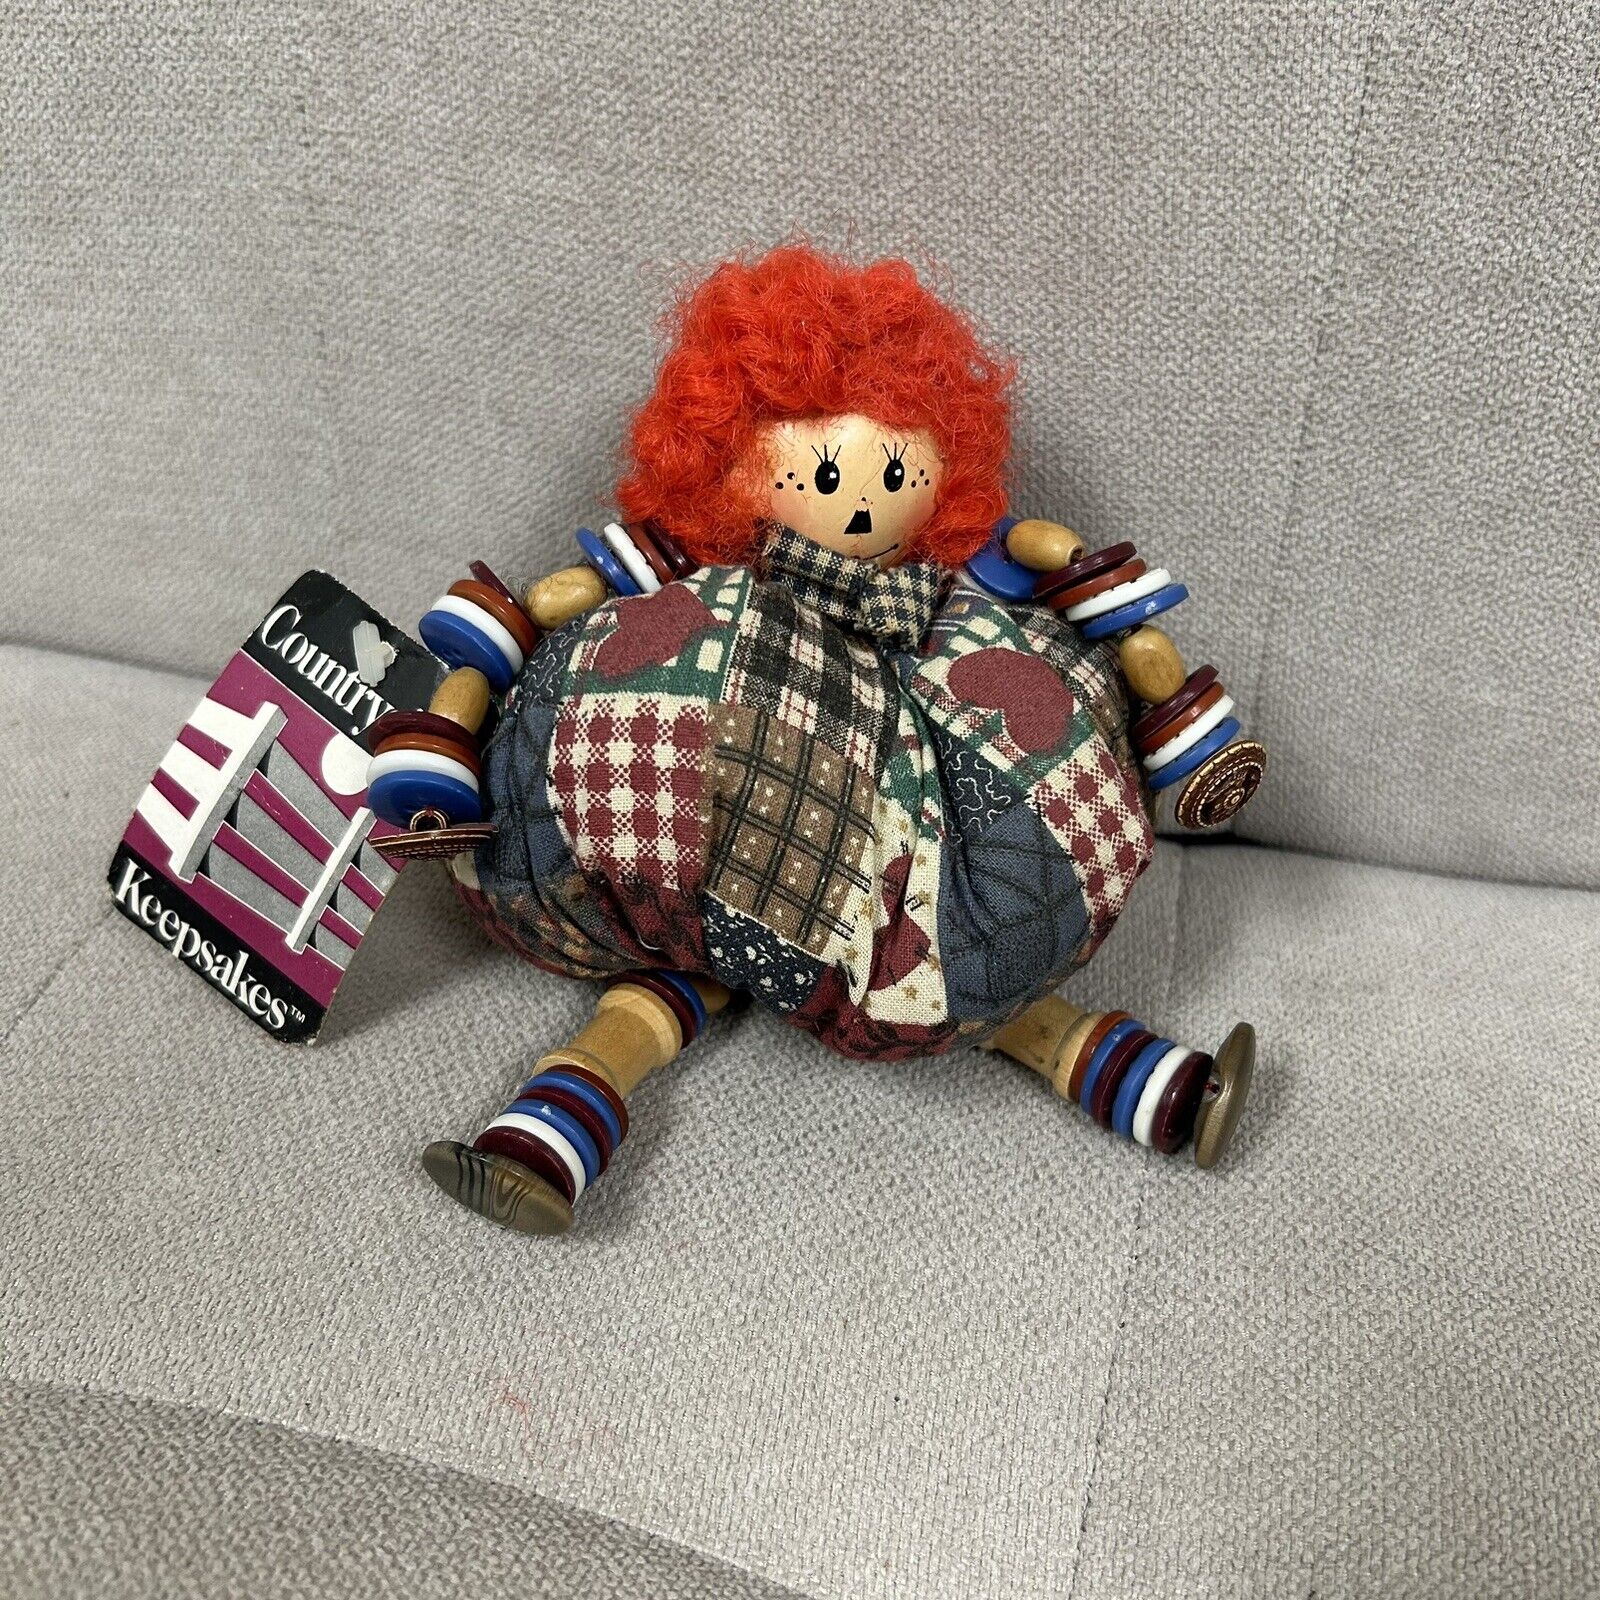 Vintage Raggedy Ann Shelf Sitter Made With Spools And Buttons  With Tag